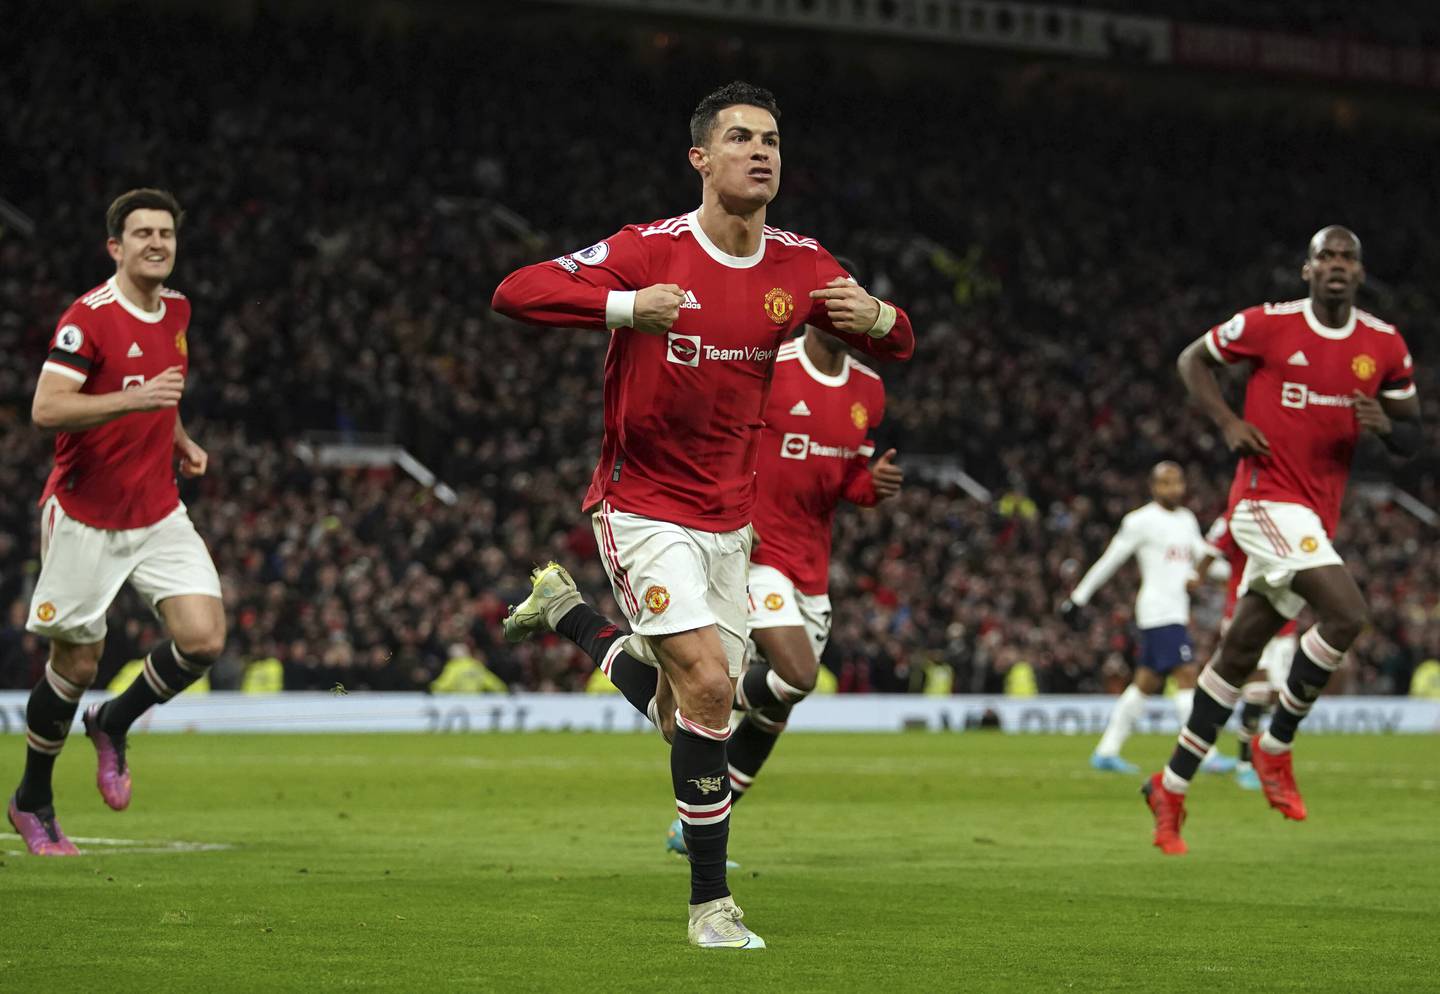 Manchester United's Cristiano Ronaldo celebrates after completing his hat-trick against Tottenham Hotspur on March 12, 2022. AP